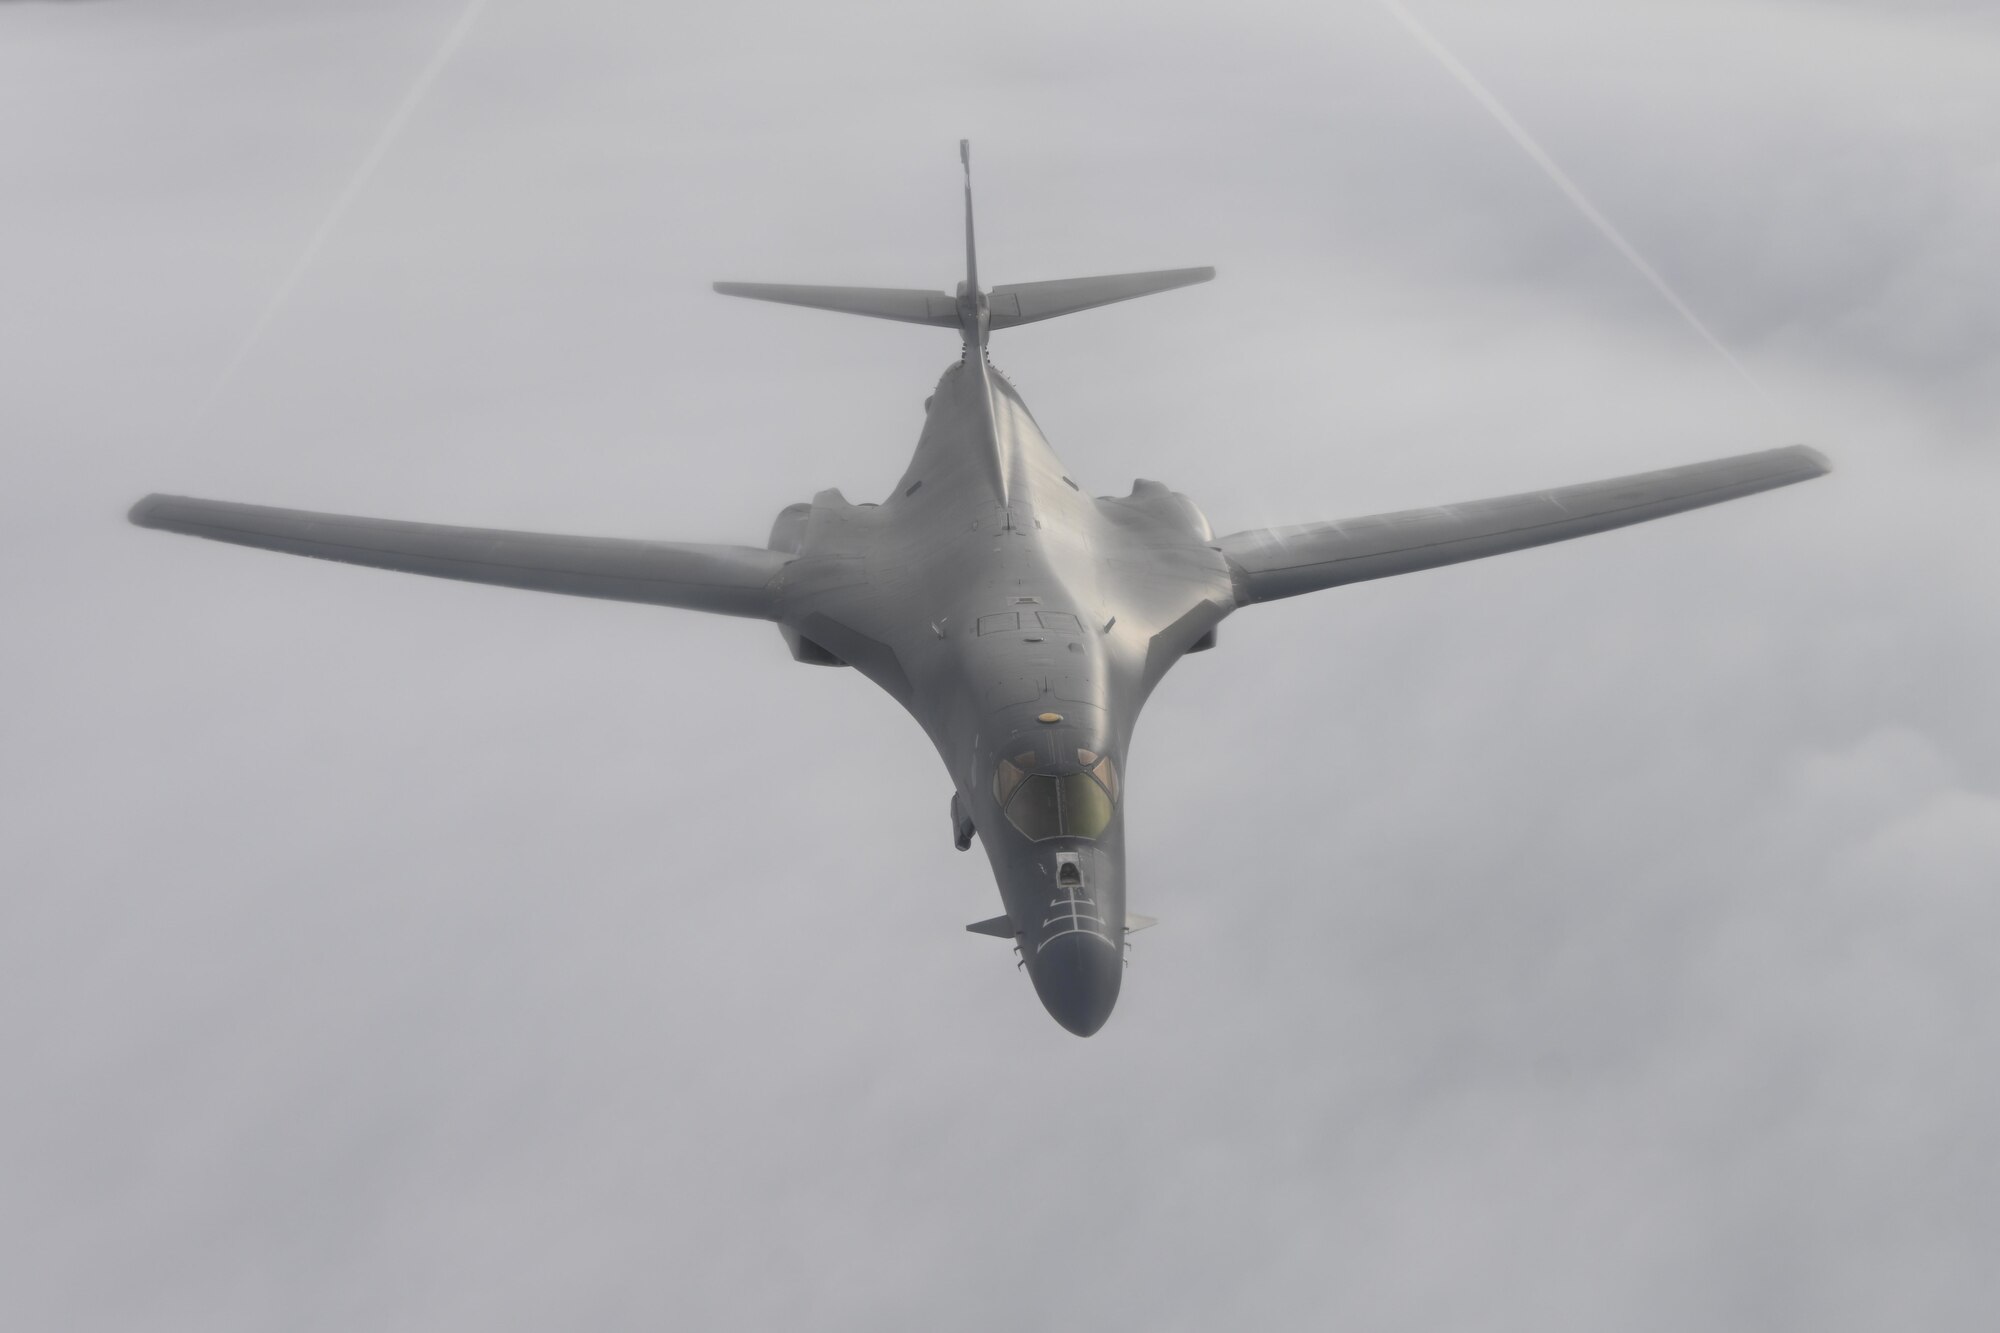 A 9th Expeditionary Bomb Squadron B-1B Lancer, deployed in support of Bomber Task Force Europe 22-1, flies away after receiving fuel from a 100th Air Refueling Wing KC-135 Stratotanker enroute to a Black Sea maritime targeting training mission, Oct. 19, 2021. The Bomber Task Force Europe mission series requires a joint and coalition force to support strategic bomber deployments within the European theater, which amplifies readiness and promotes interoperability between rotational bomber aircrew, NATO allies, and coalition partners.